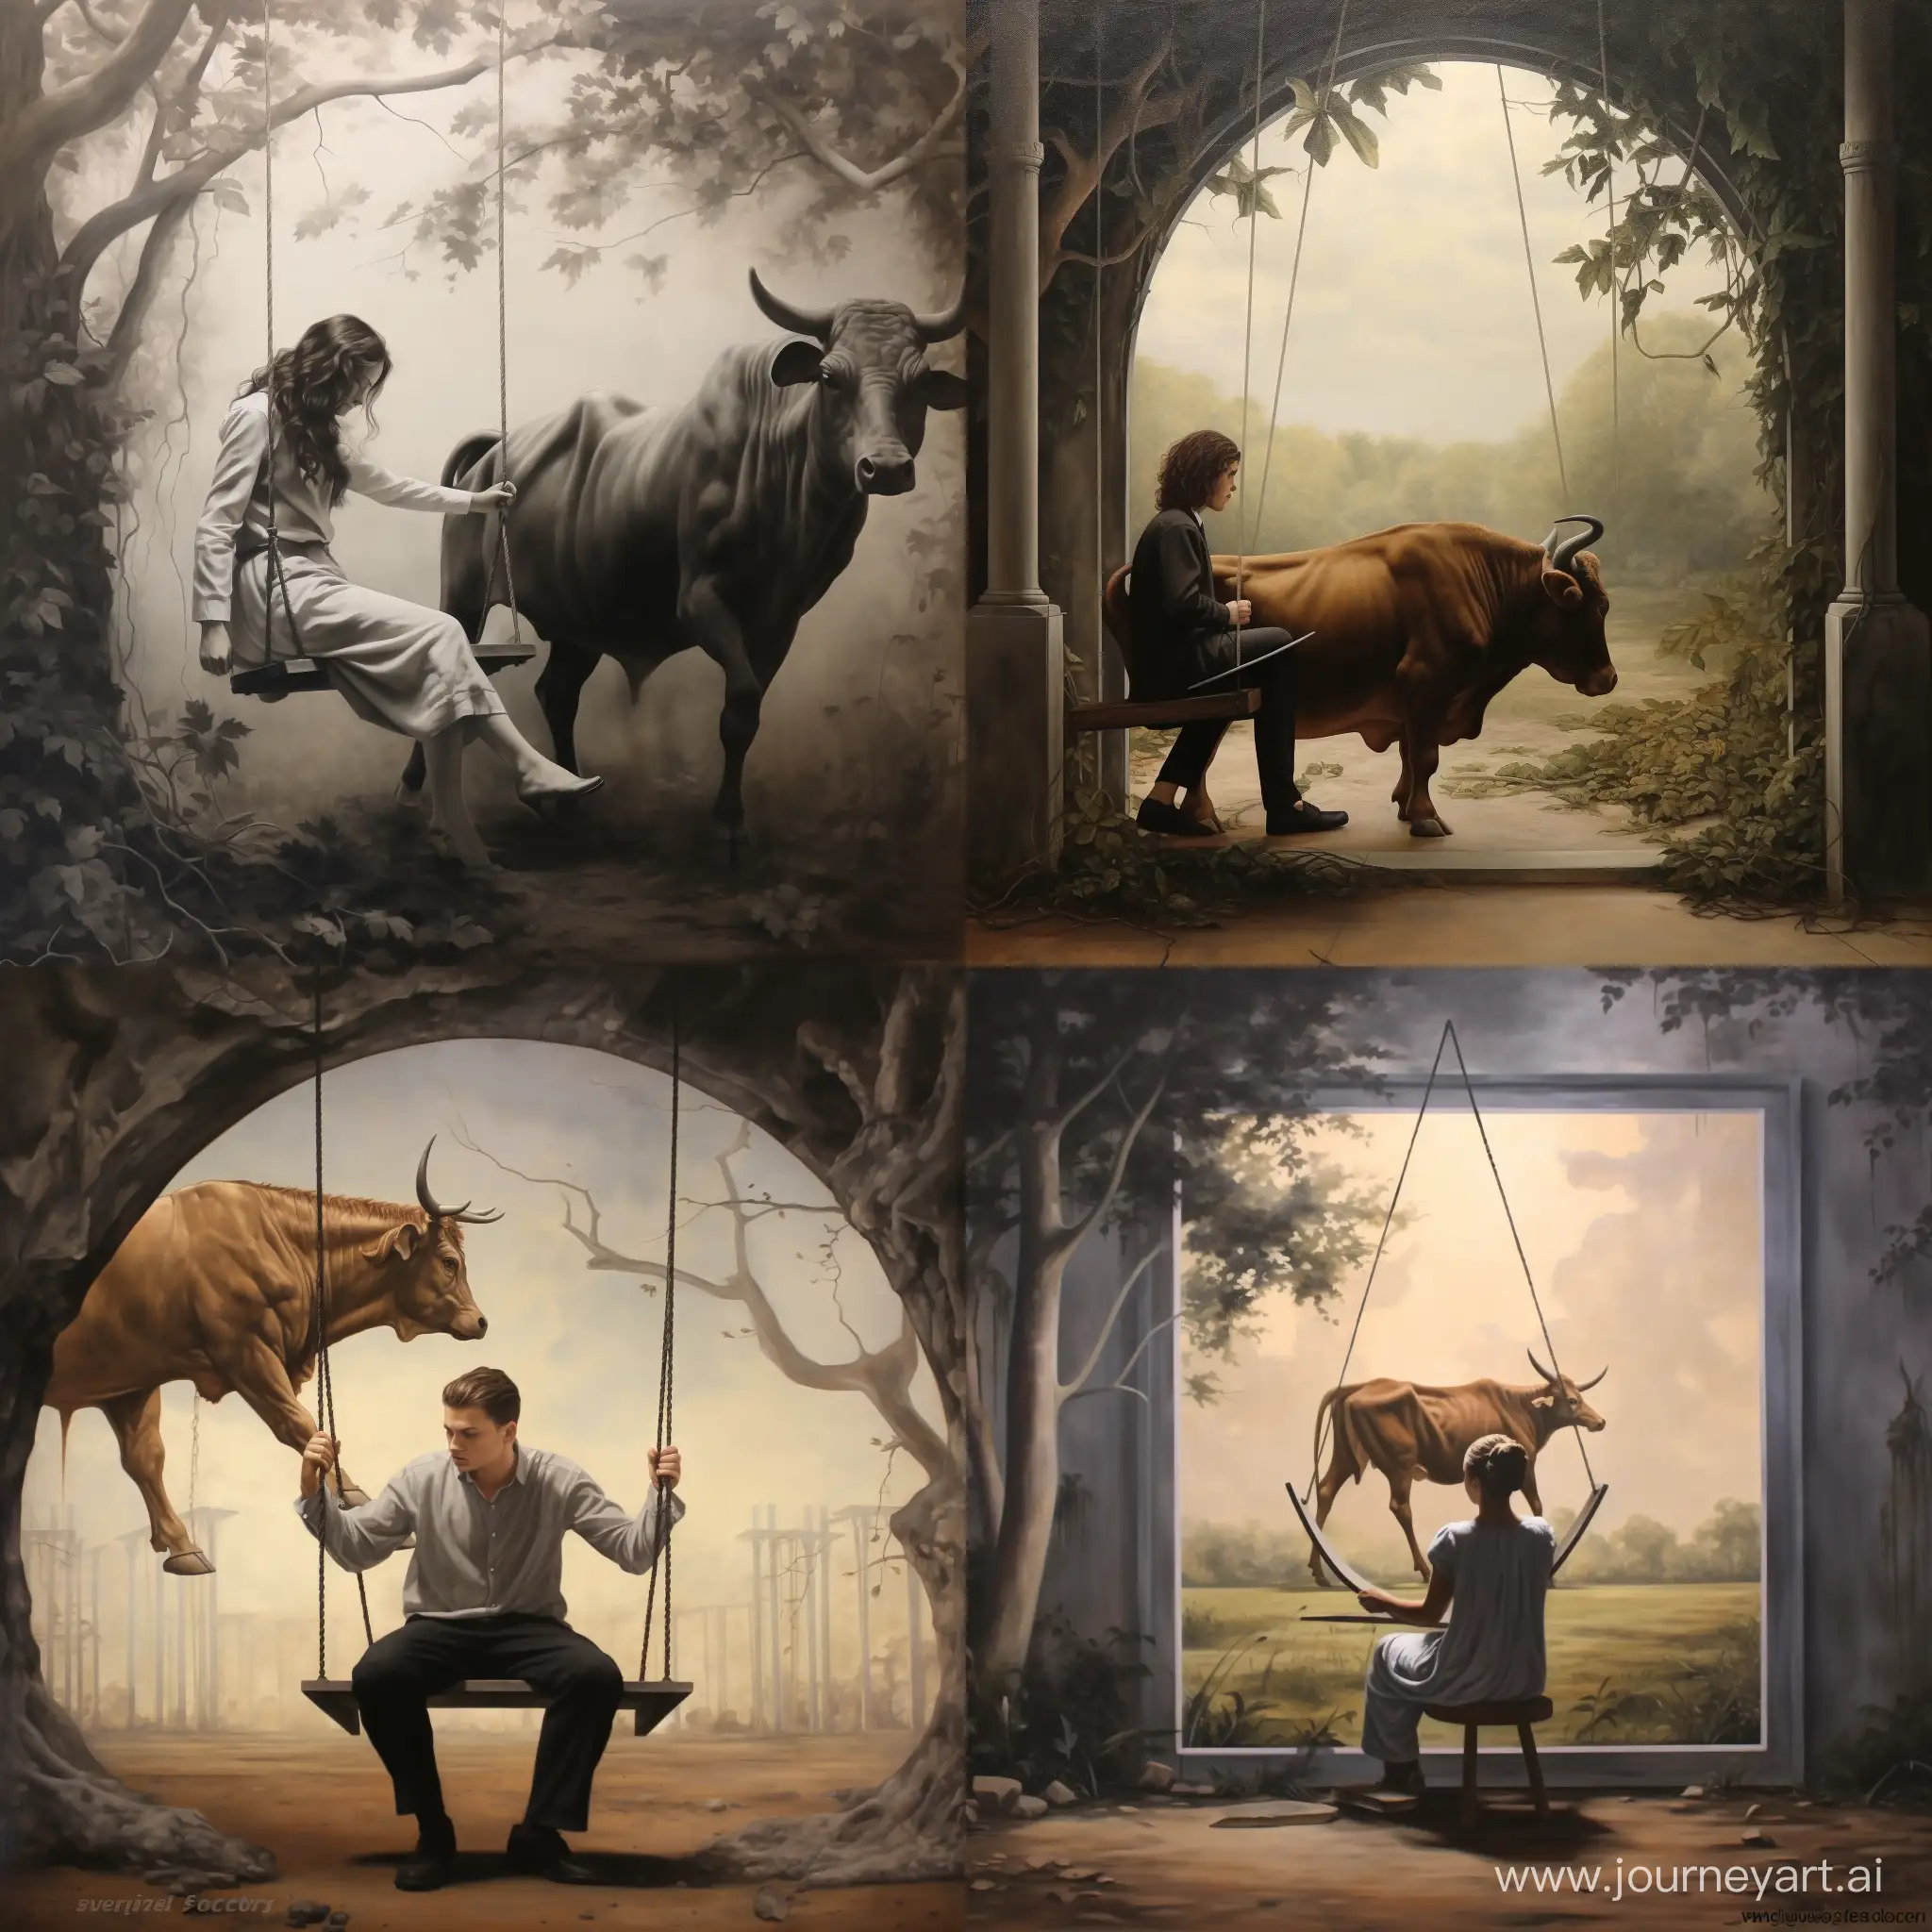 JesYou are a socialist realism artist painting a picture. The bull is swinging, sighing on the move, the board is swinging now I'm going to fall. Realistic, naturalistic atmosphere, muted shades of brown and gray, the look of the bull is sad and sad.us in the Garden of Eden